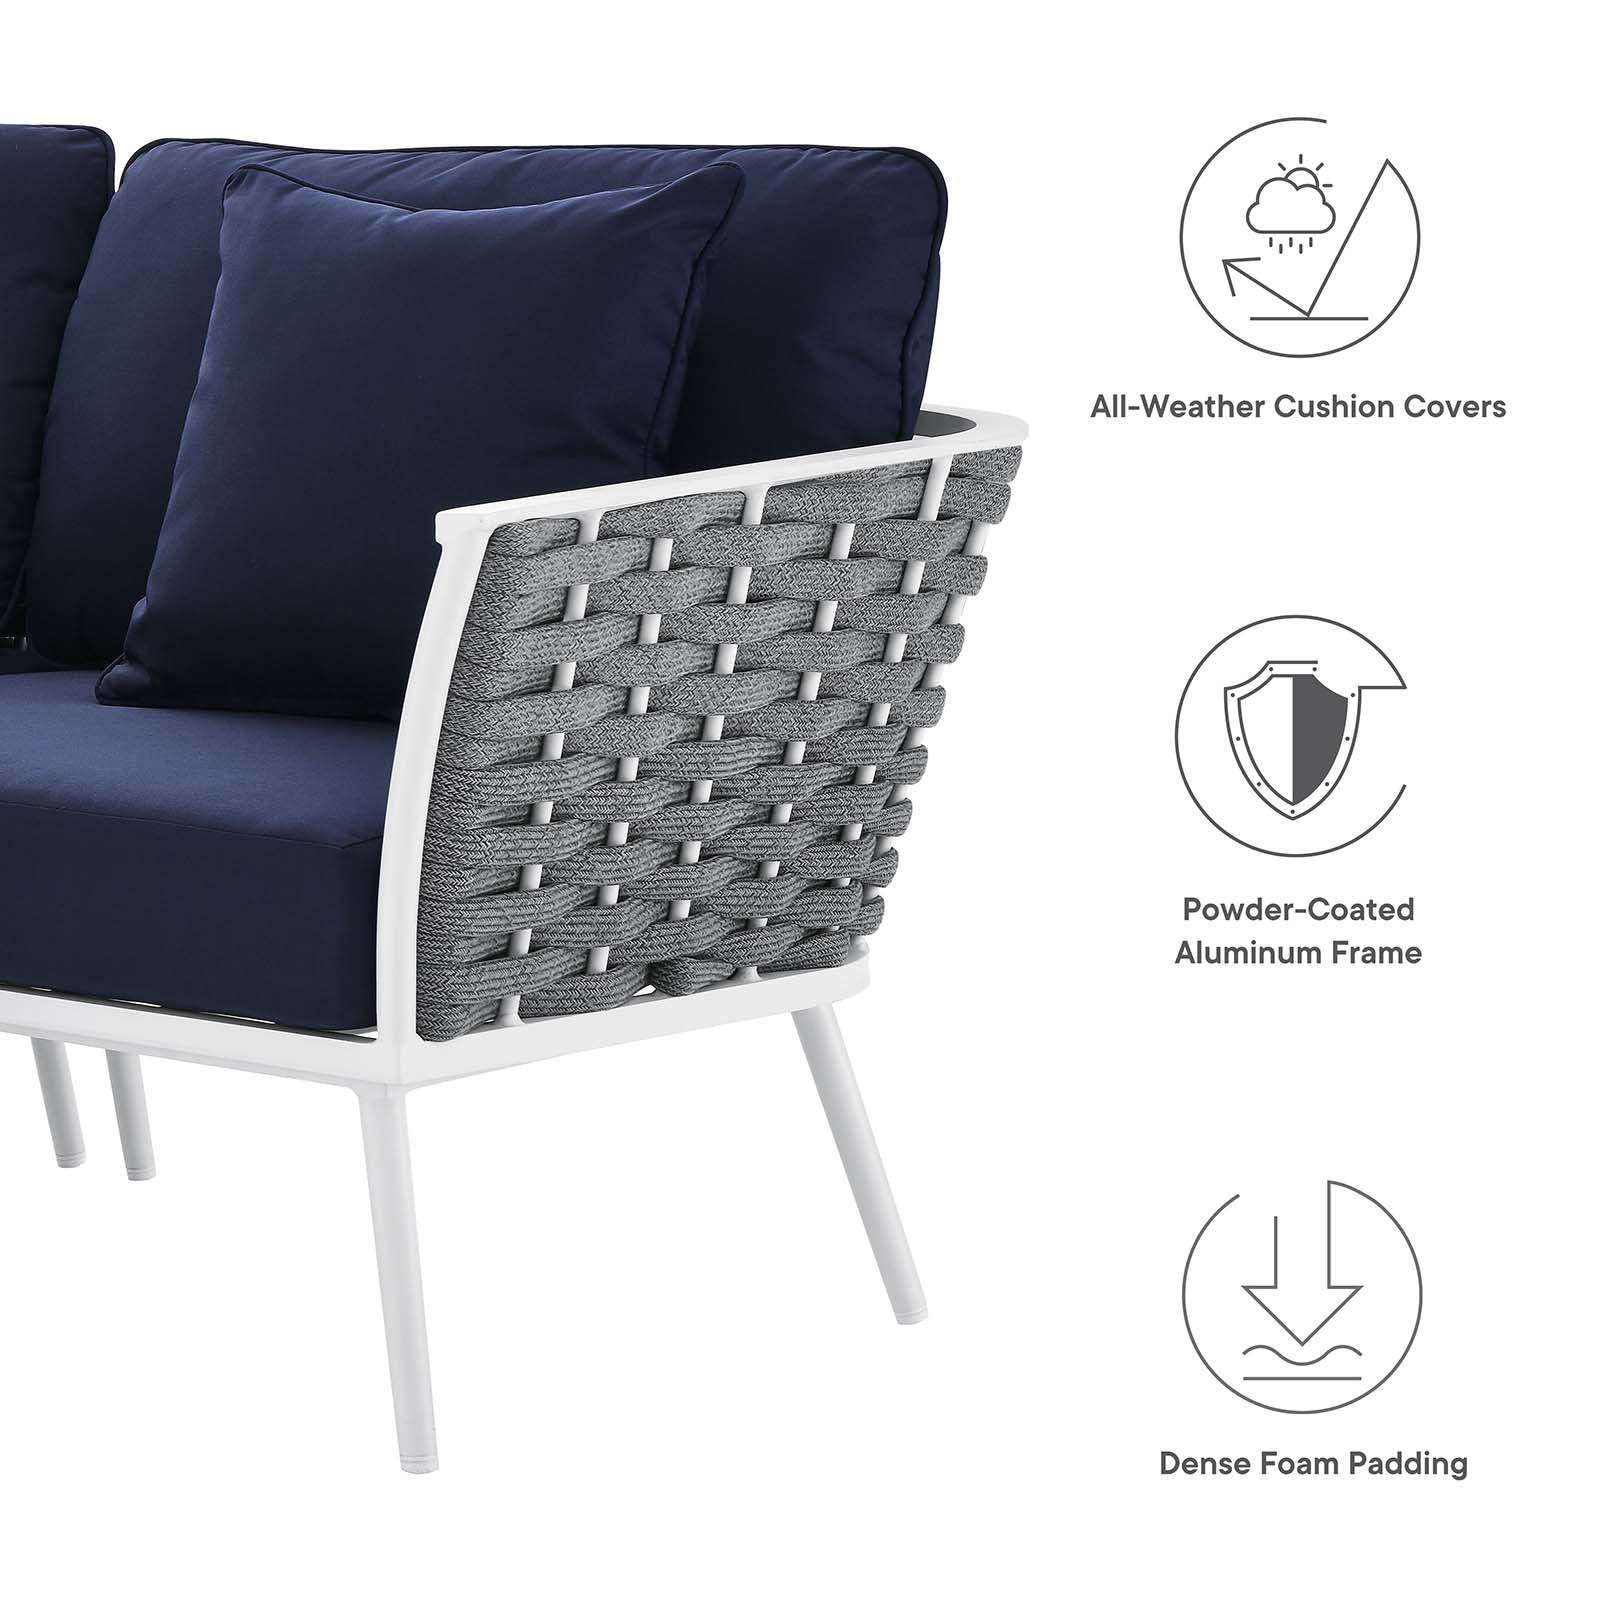 Lounge Sectional Sofa Chair Table Set, Navy White, Aluminum, Metal, Fabric, Modern Contemporary, Outdoor Patio Balcony Cafe Bistro Garden Furniture Hotel Hospitality - image 3 of 10